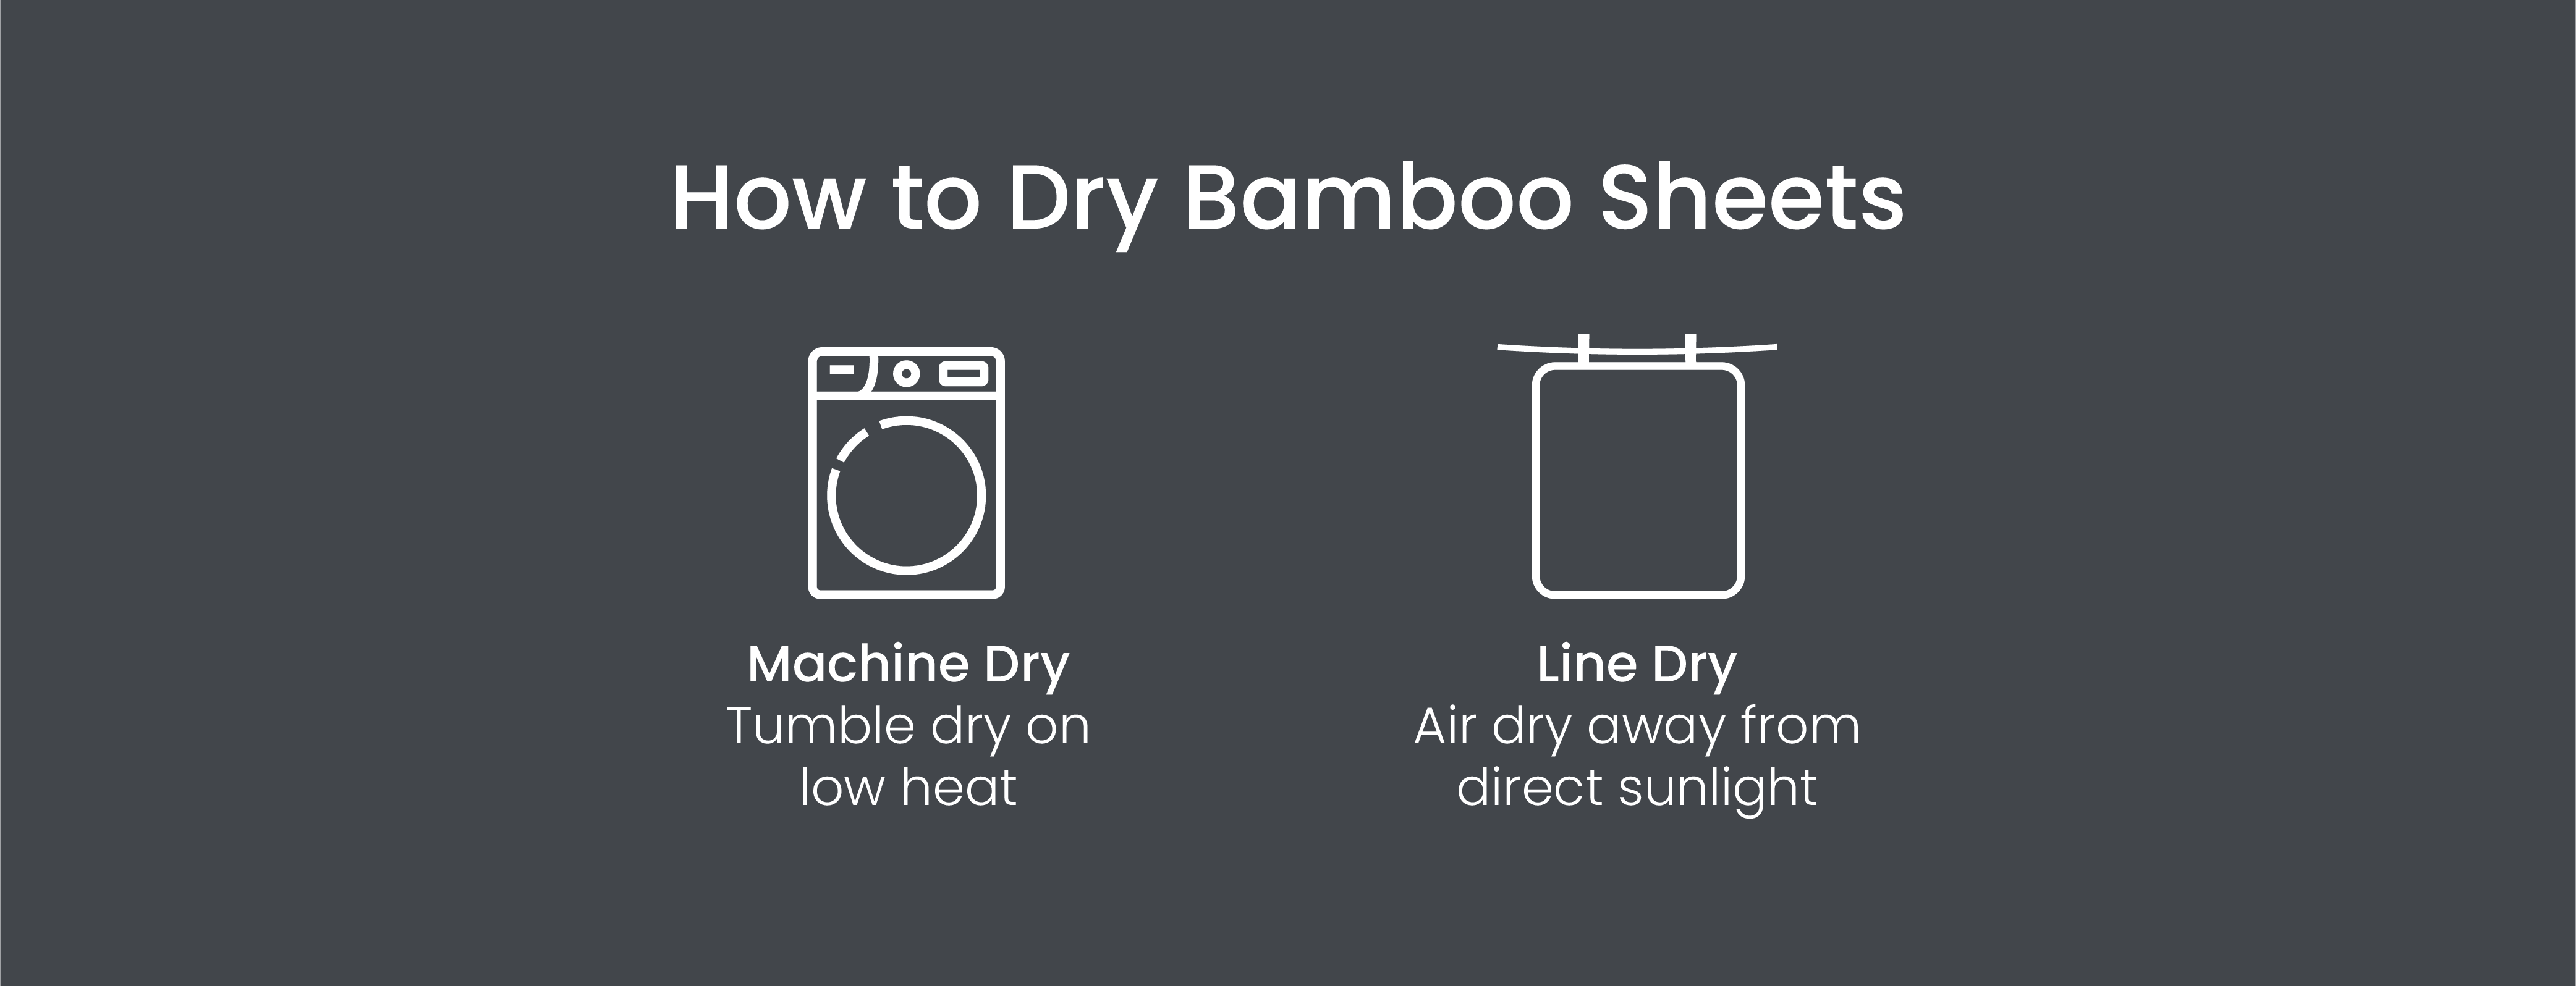 How to dry bamboo sheets